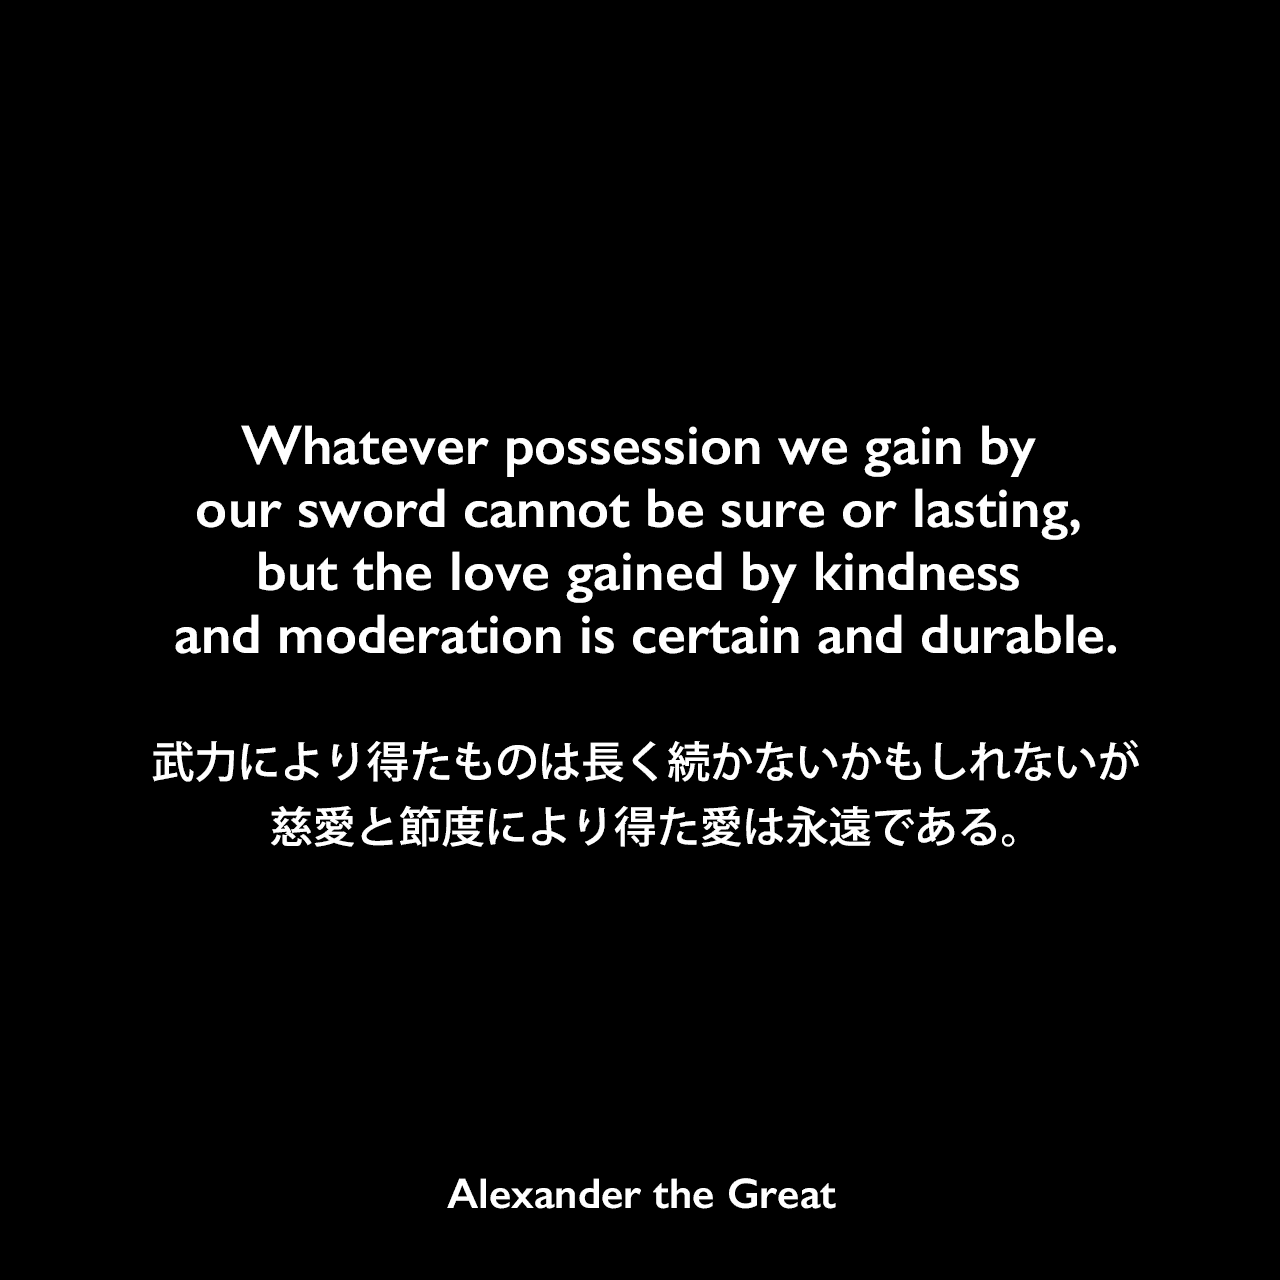 Whatever possession we gain by our sword cannot be sure or lasting, but the love gained by kindness and moderation is certain and durable.武力により得たものは長く続かないかもしれないが、慈愛と節度により得た愛は永遠である。Alexander the Great